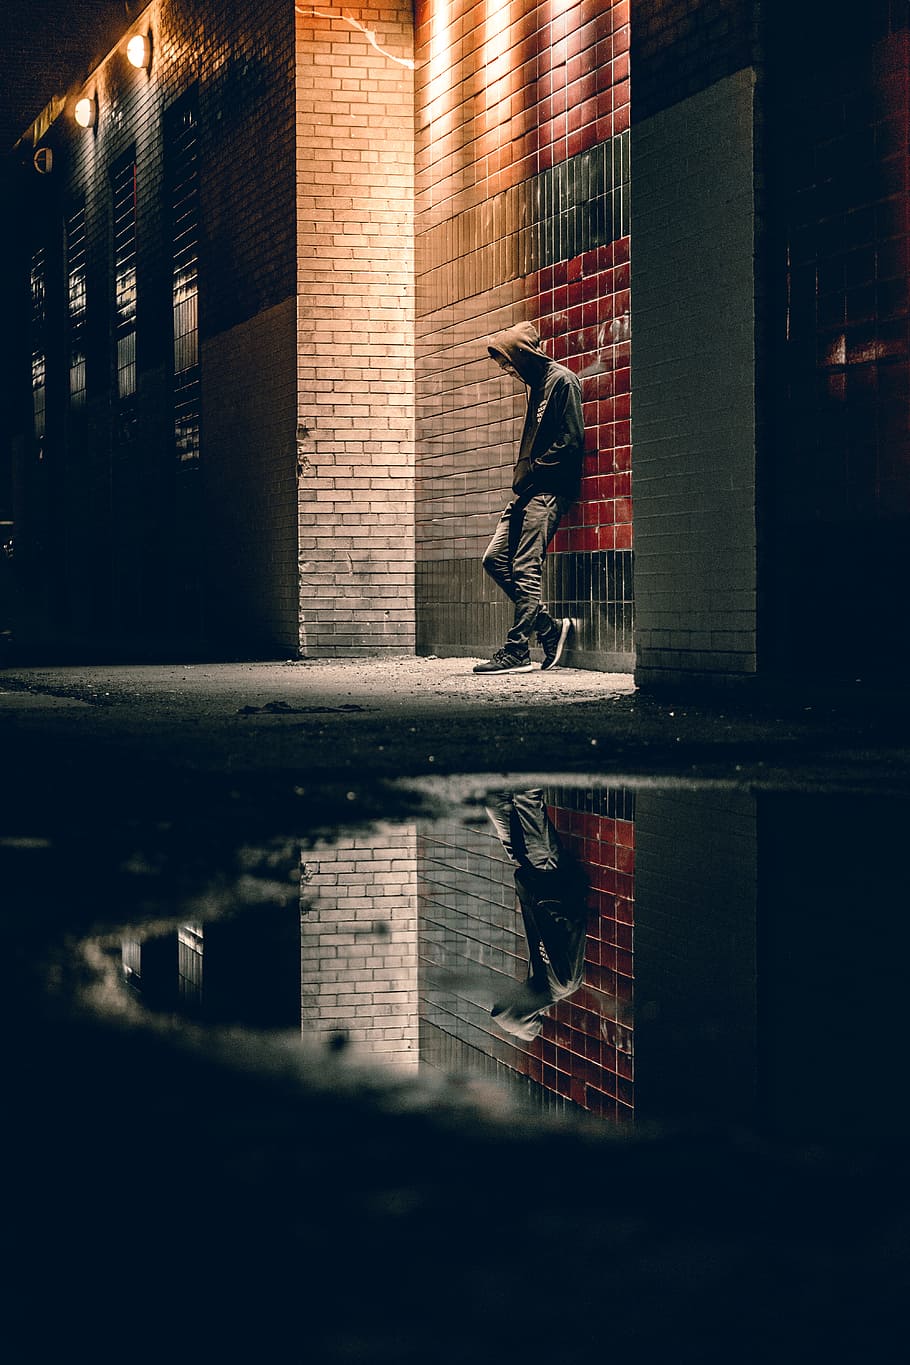 man learning on concrete wall, man stands beside red and brown brick wall at nighttime